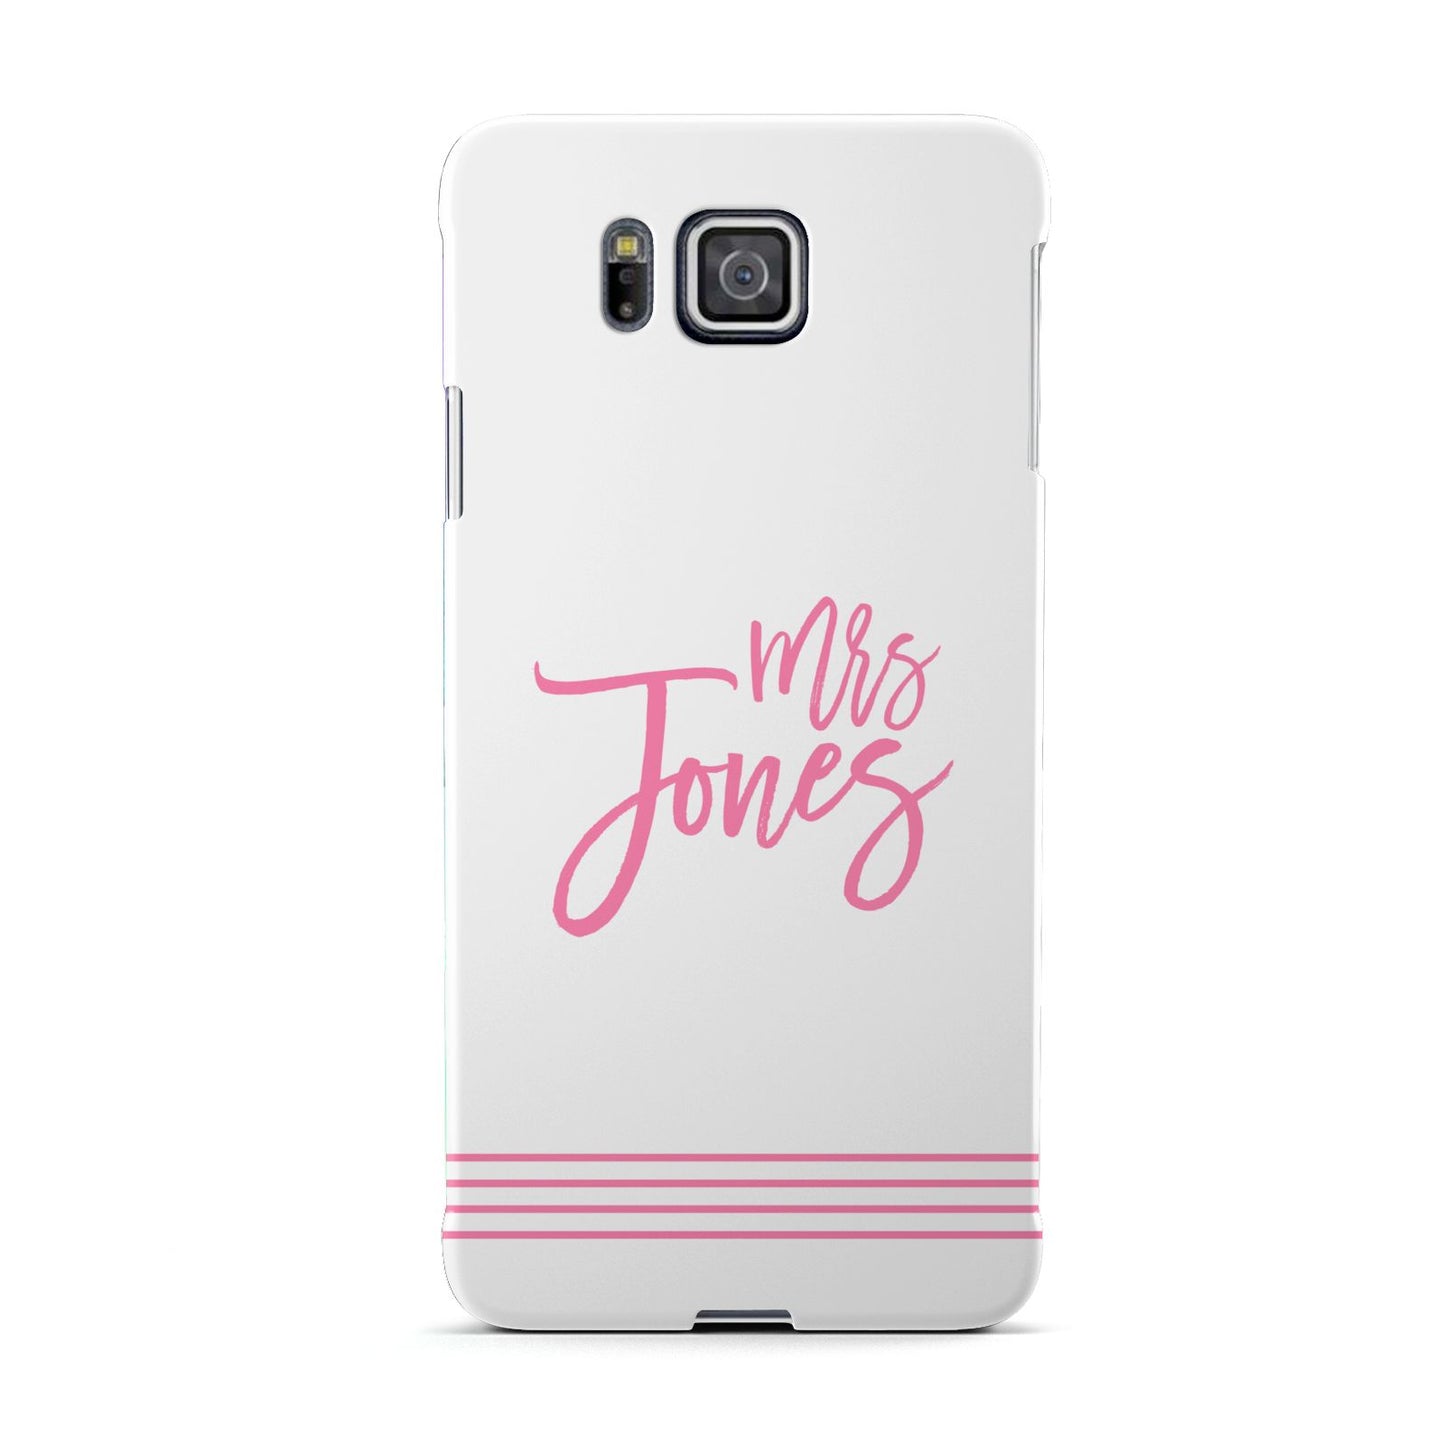 Personalised Hers Samsung Galaxy Alpha Case